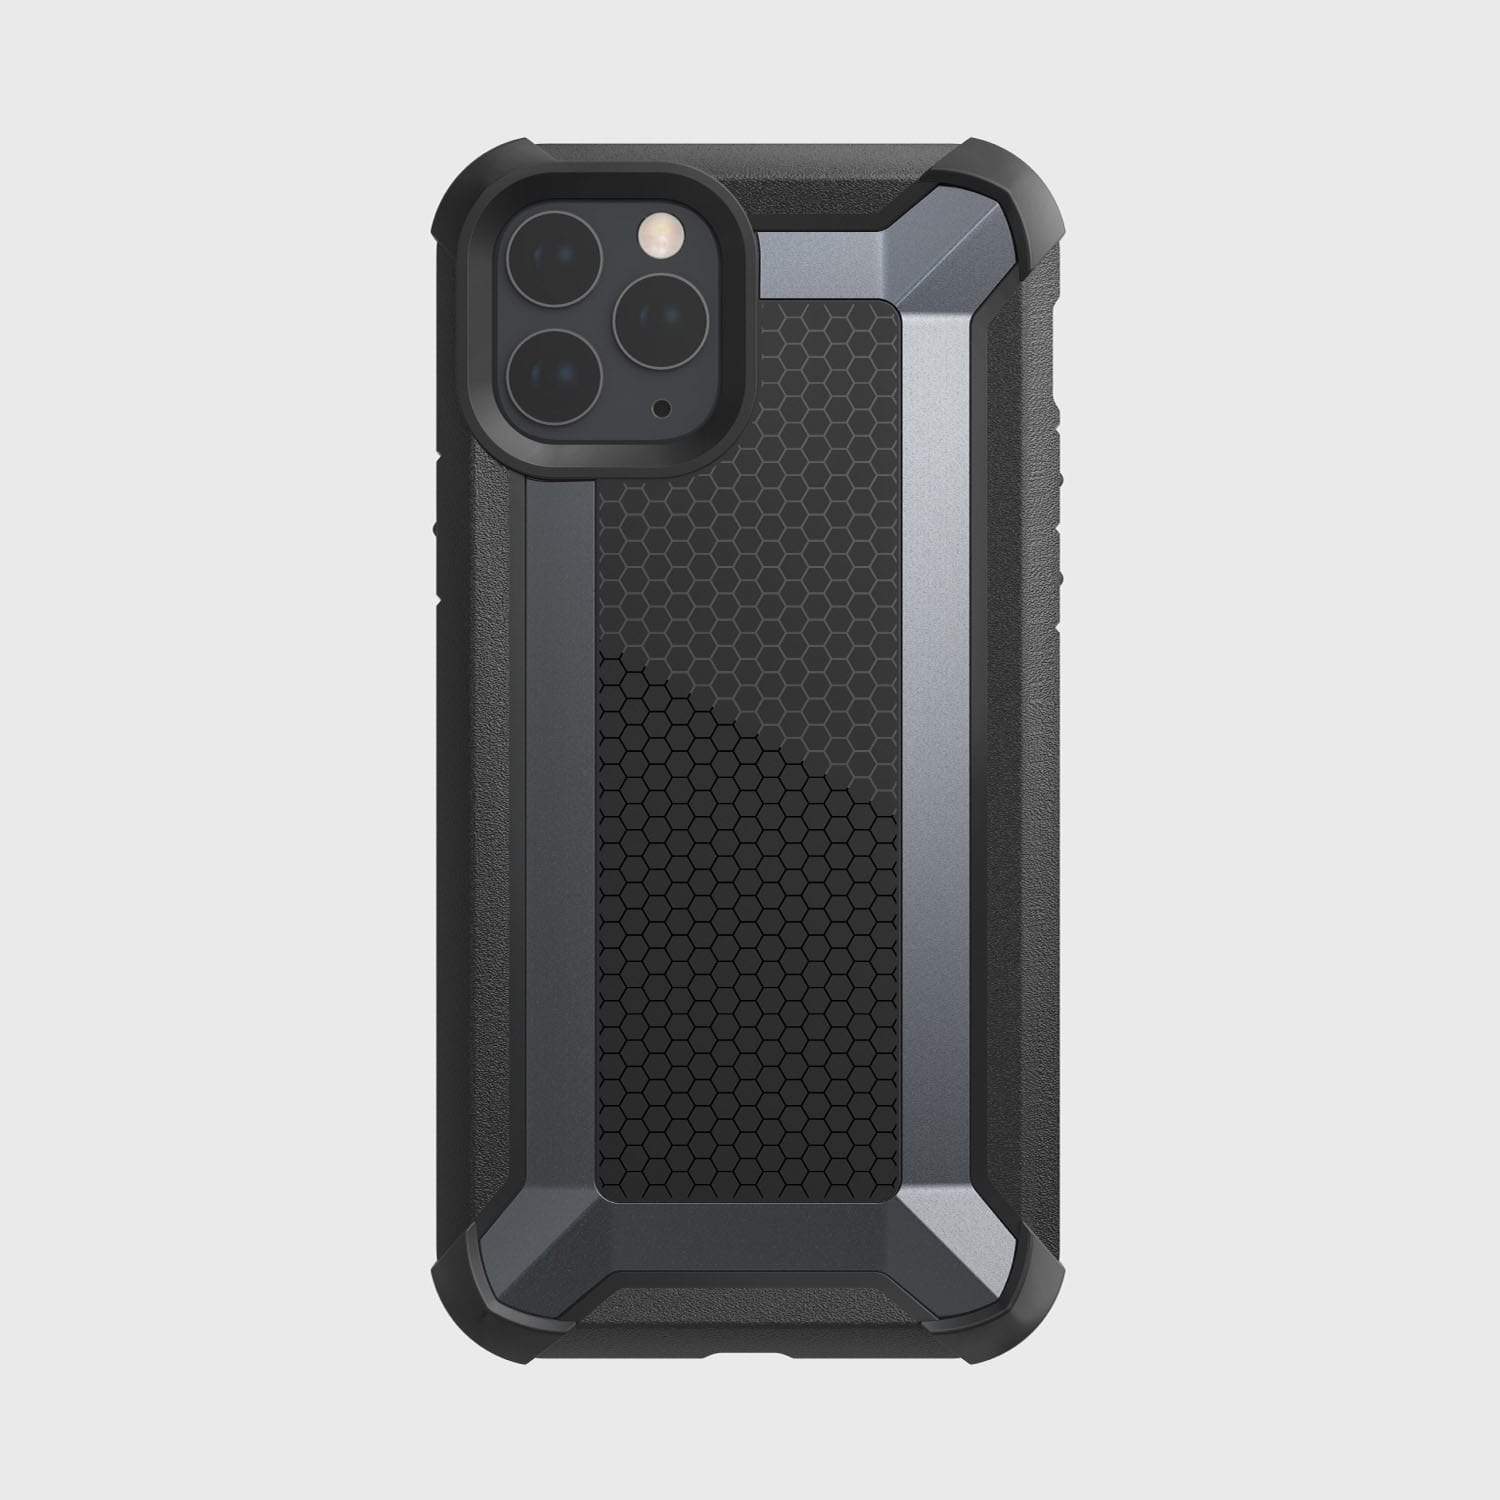 The protective iPhone 11 Pro case - TACTICAL is shown in black. Brand name: Raptic.